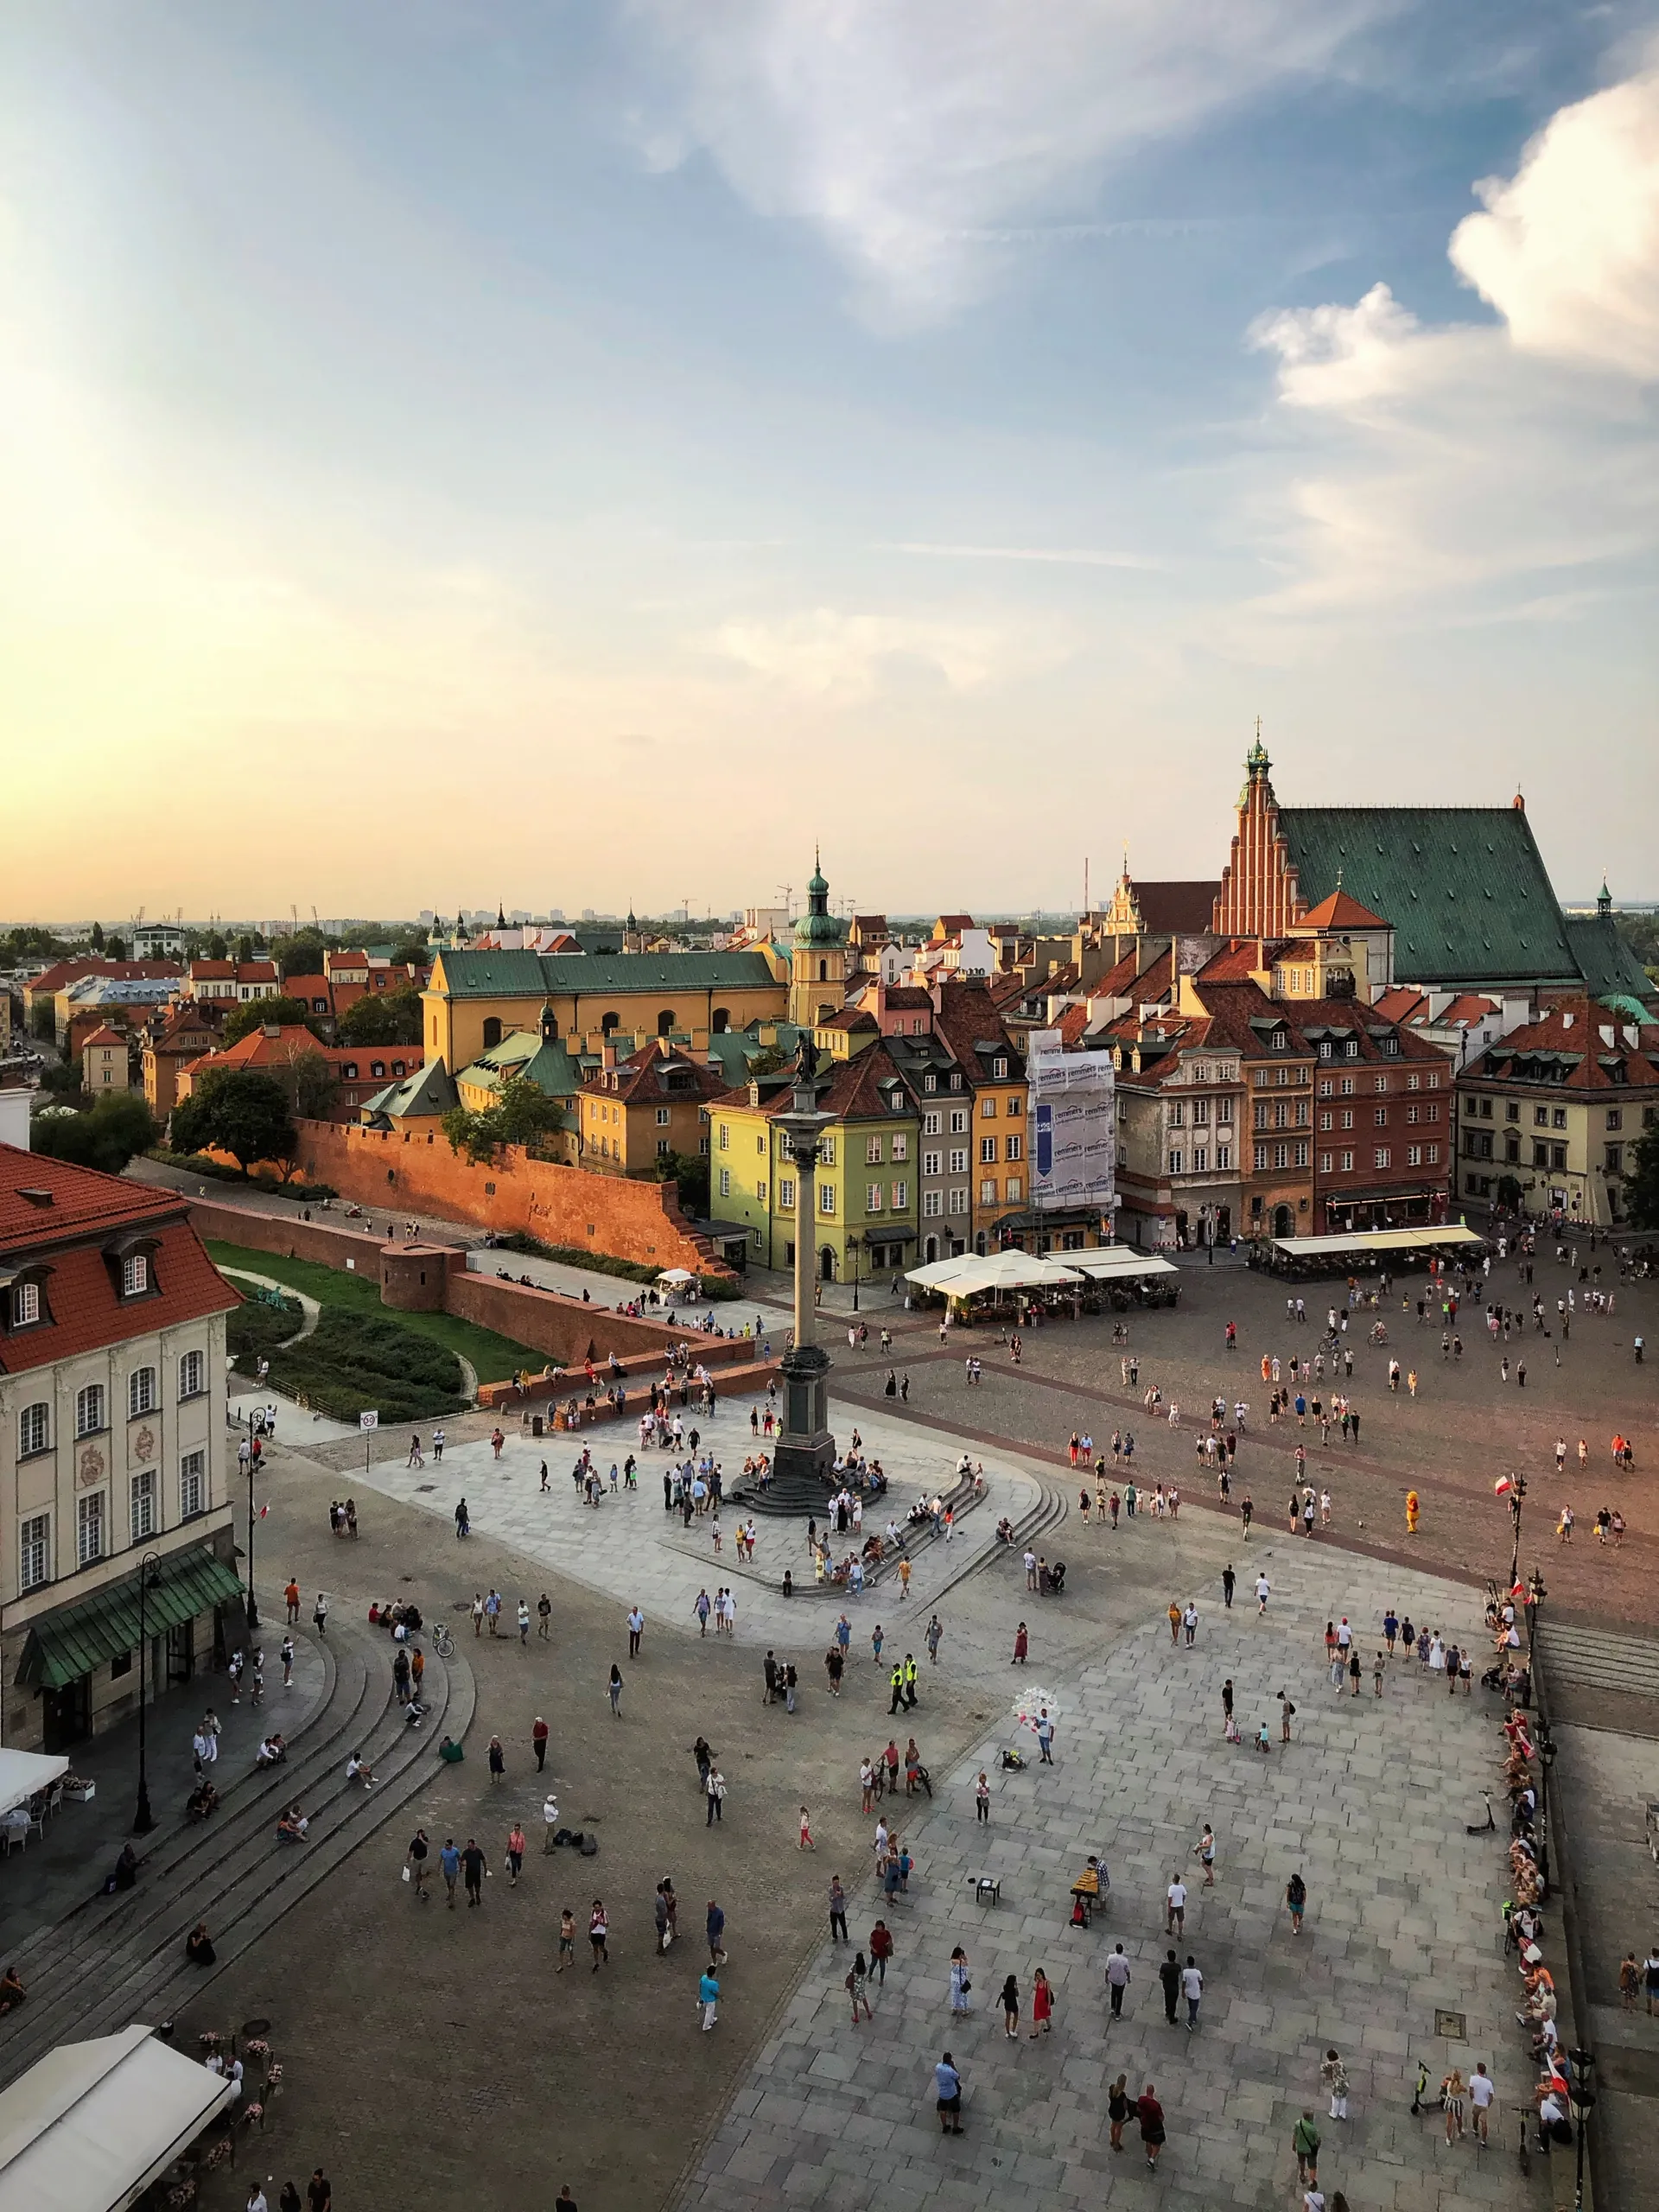 The benefits of outsourcing your software project to Poland